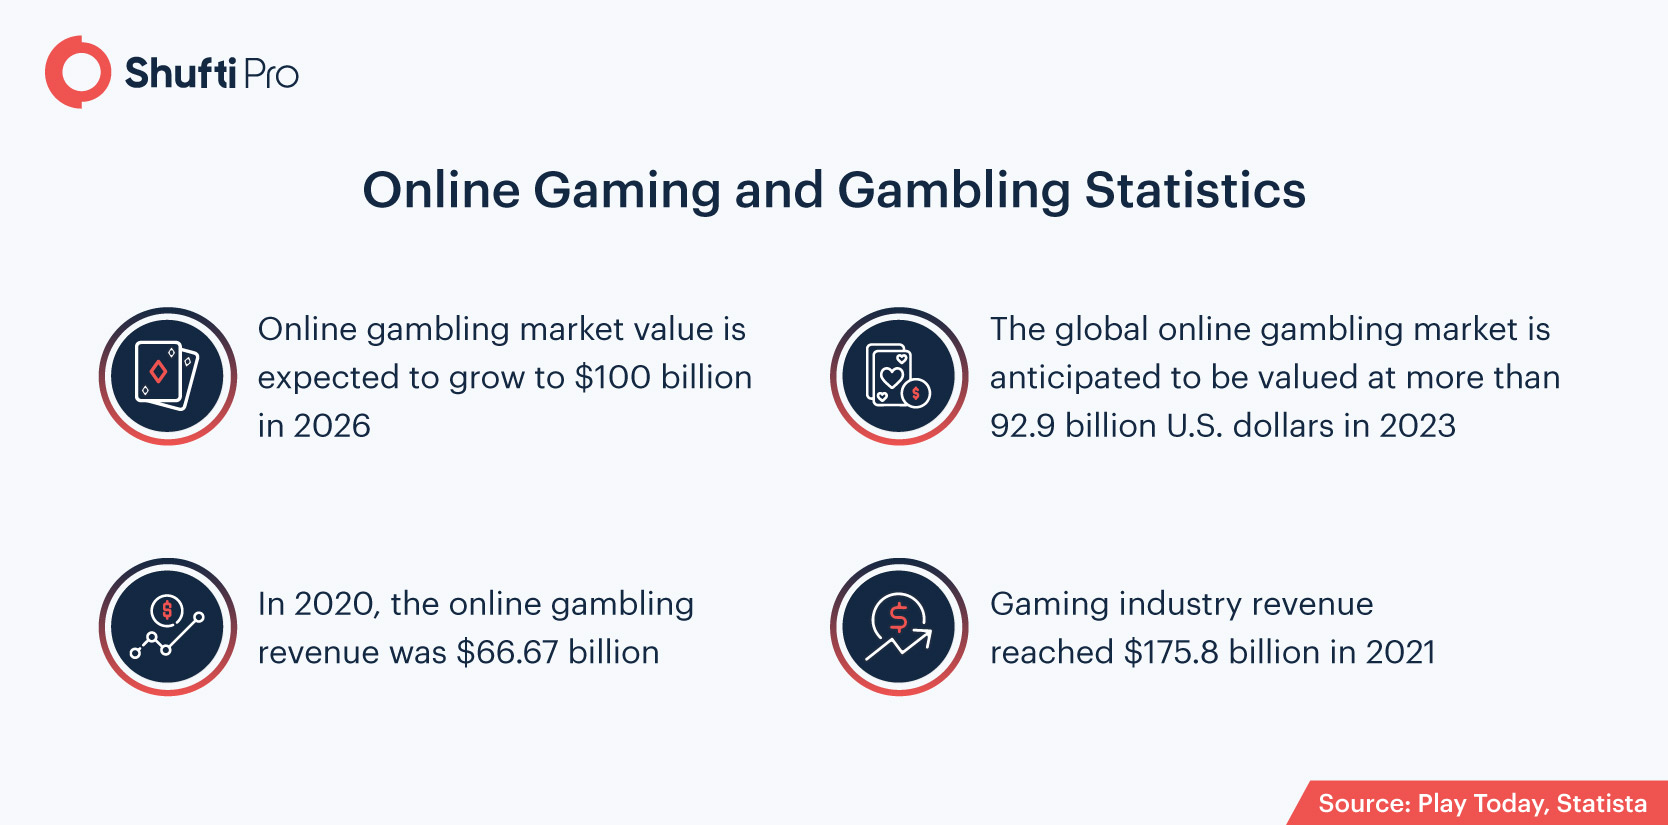 How To Find The Time To casino online On Google in 2021